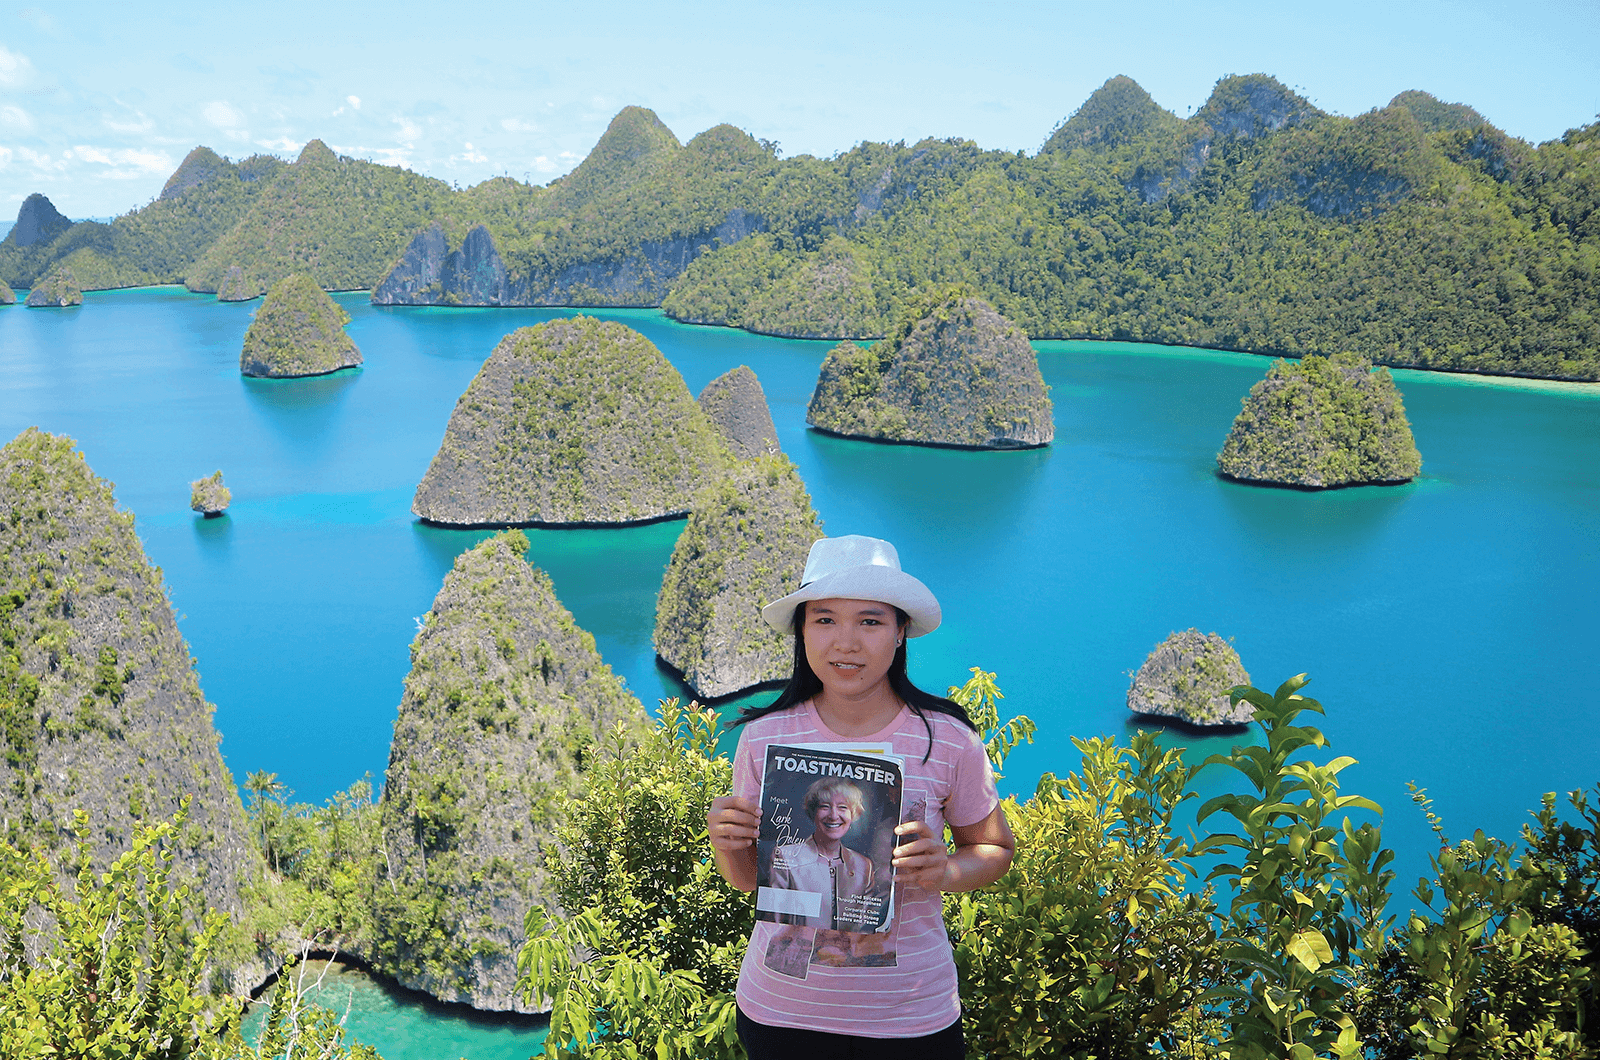 Dian Halleyuisari of Bali, Indonesia, travels to the Raja Ampat Islands, an archipelago located off the northwest tip of Bird’s Head Peninsula in West Papua, Indonesia. 